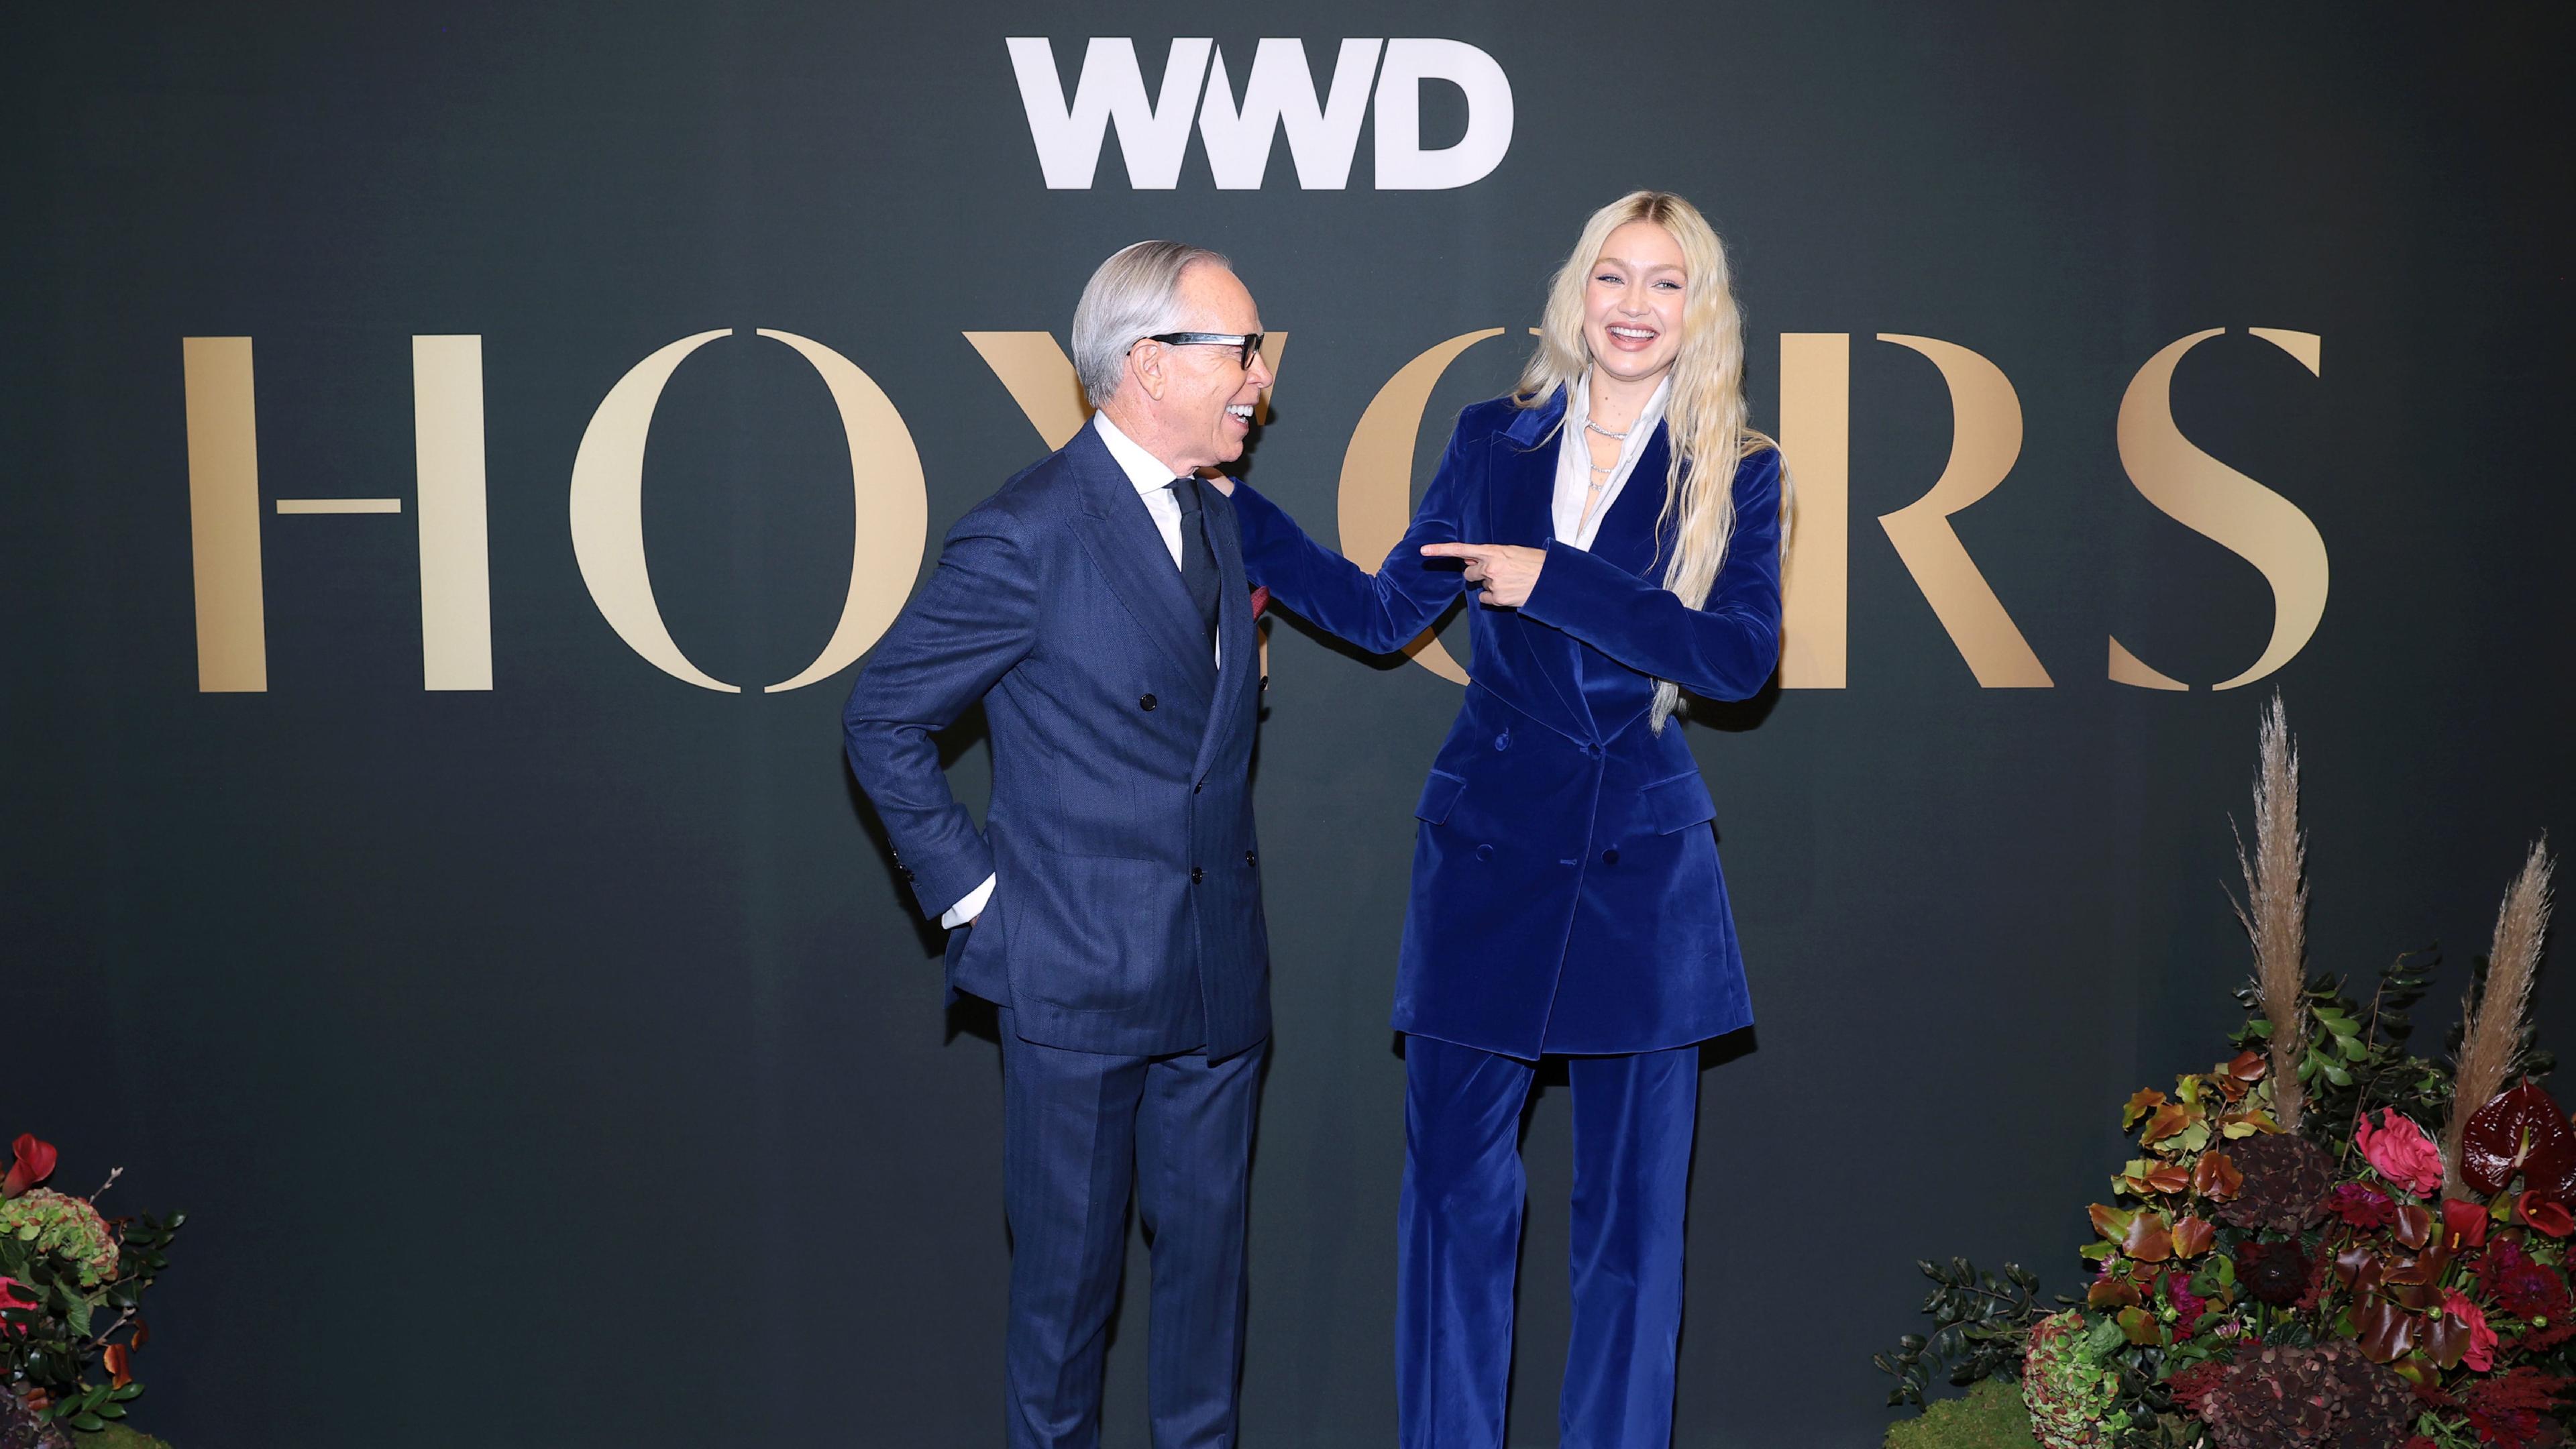 Tommy Hilfiger and Gigi Hadid standing in front of the WWD Honors stage backdrop